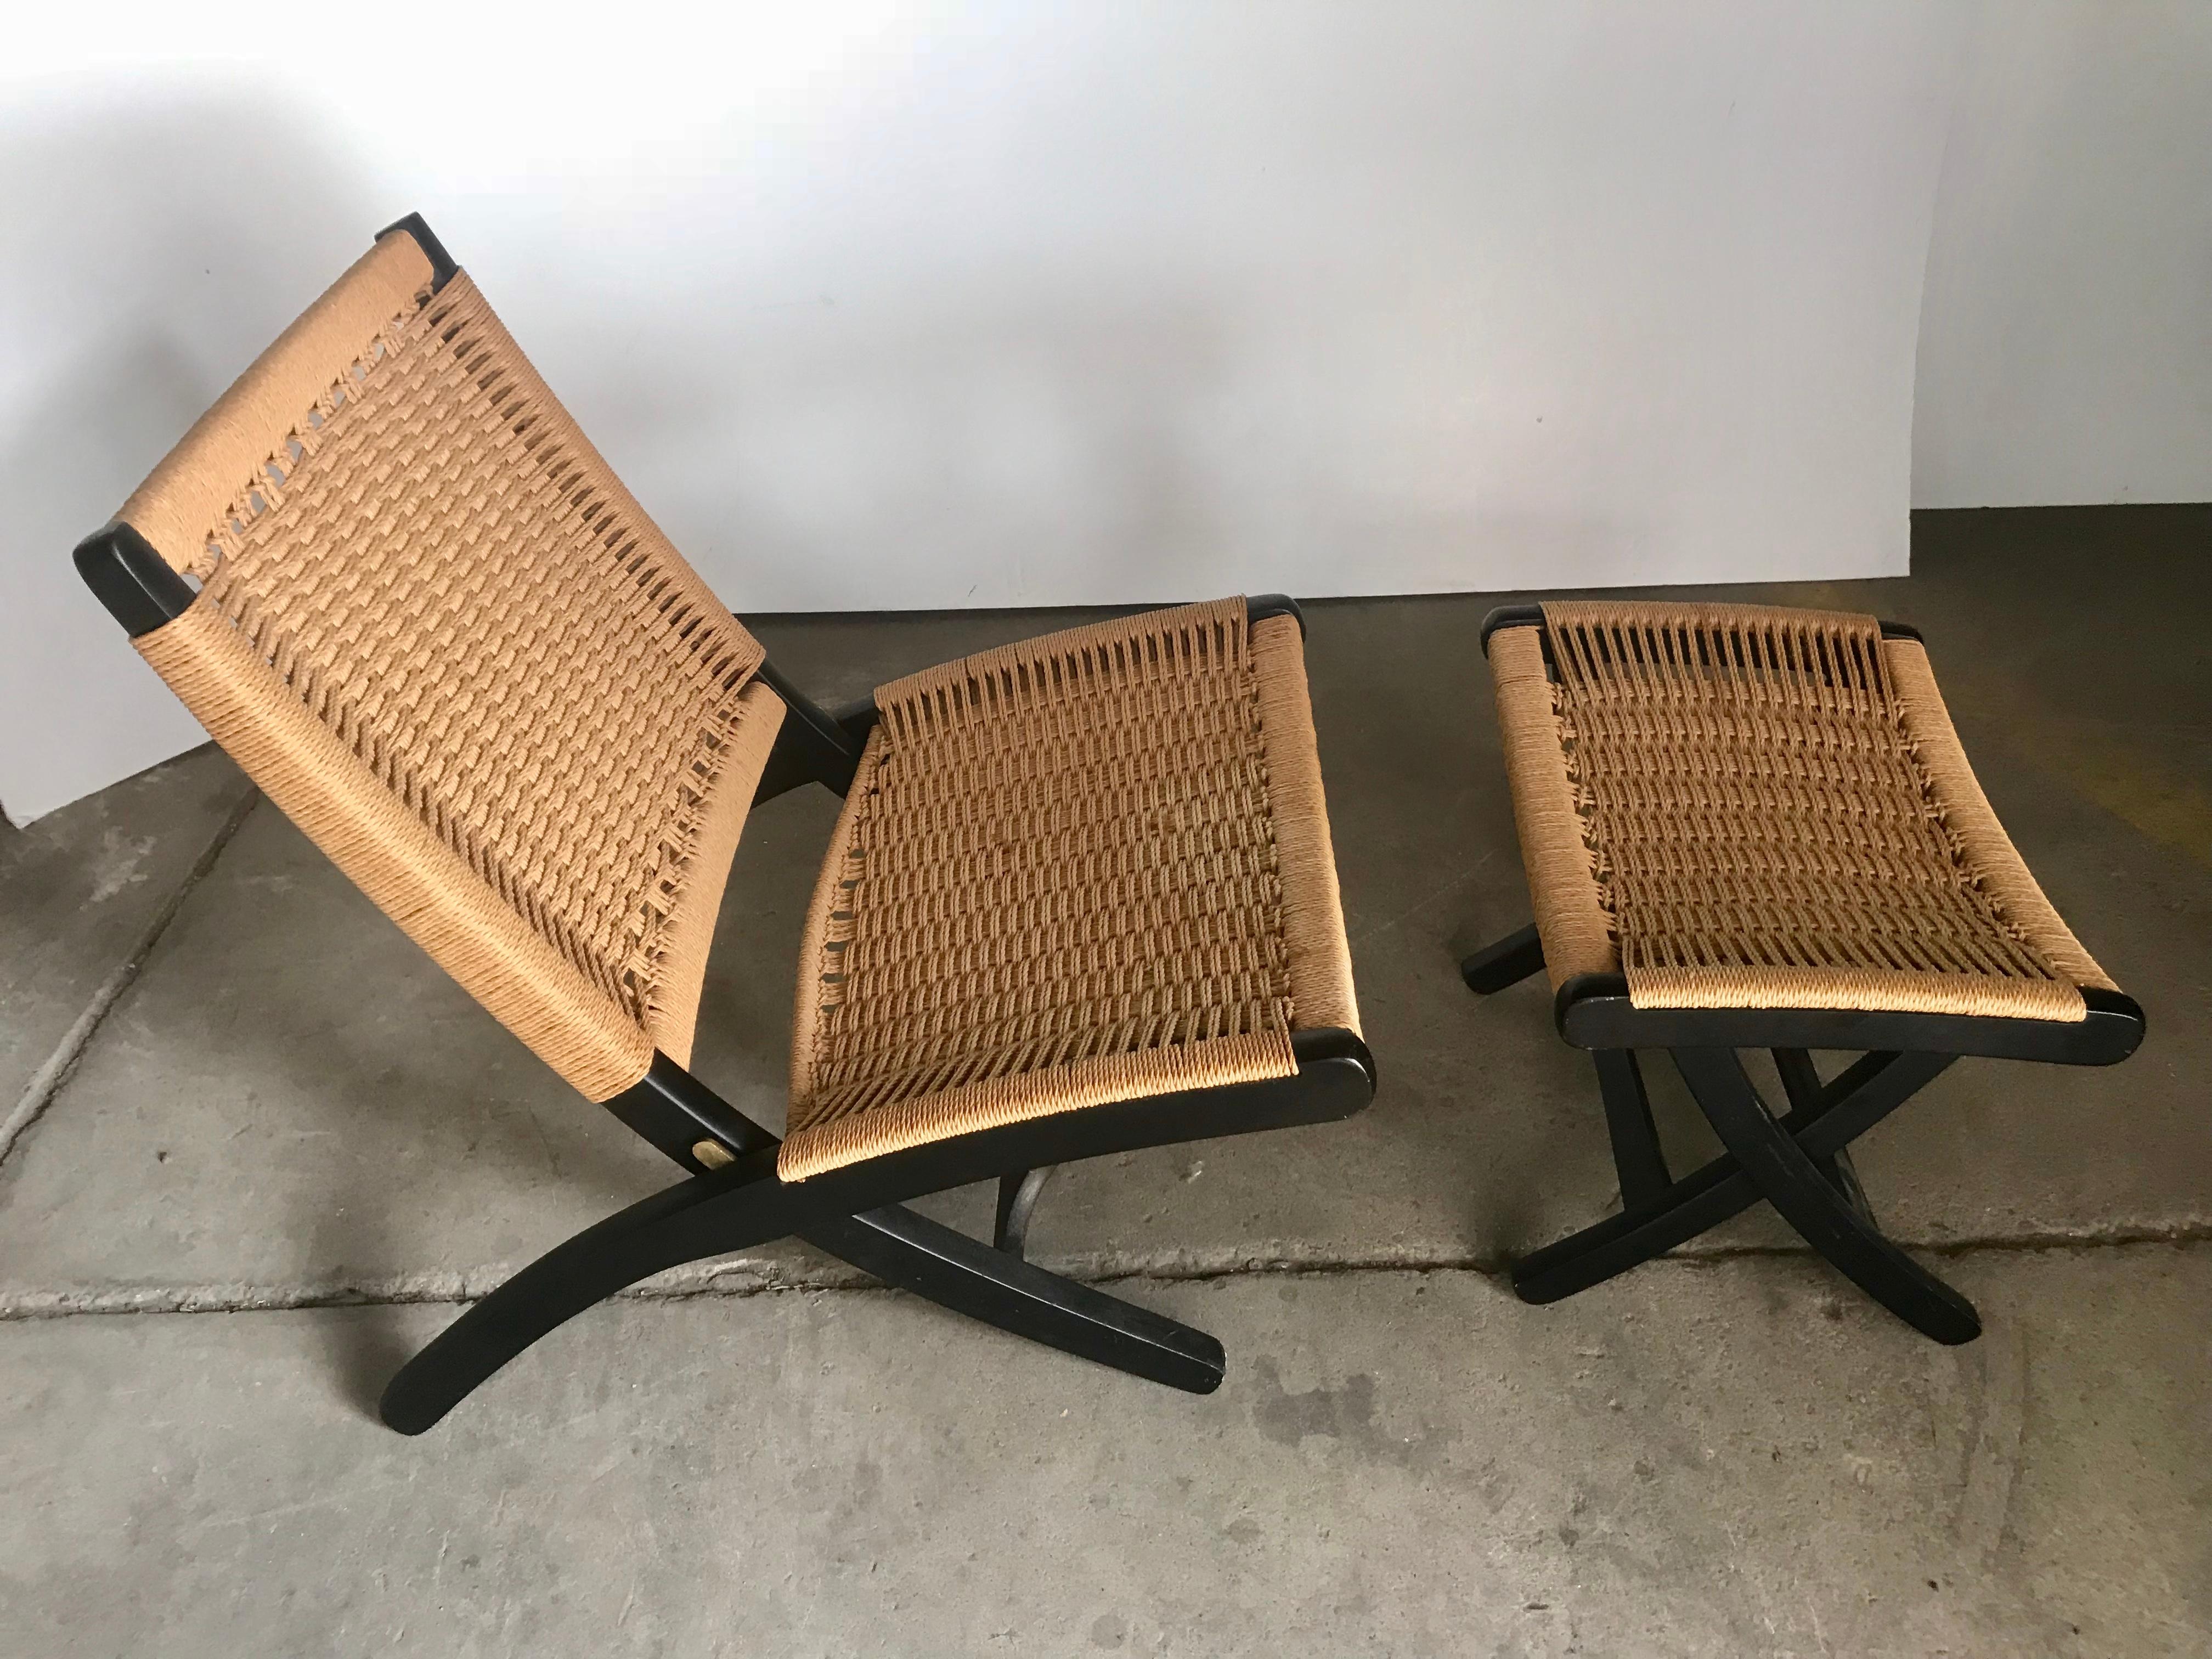 Hans Wegner style rope chair and ottoman, Classic midcentury Scandinavian modern design, quality construction, sturdy, no wobble, black lacquer folding frames, weaved rope, all original, in amazing condition.